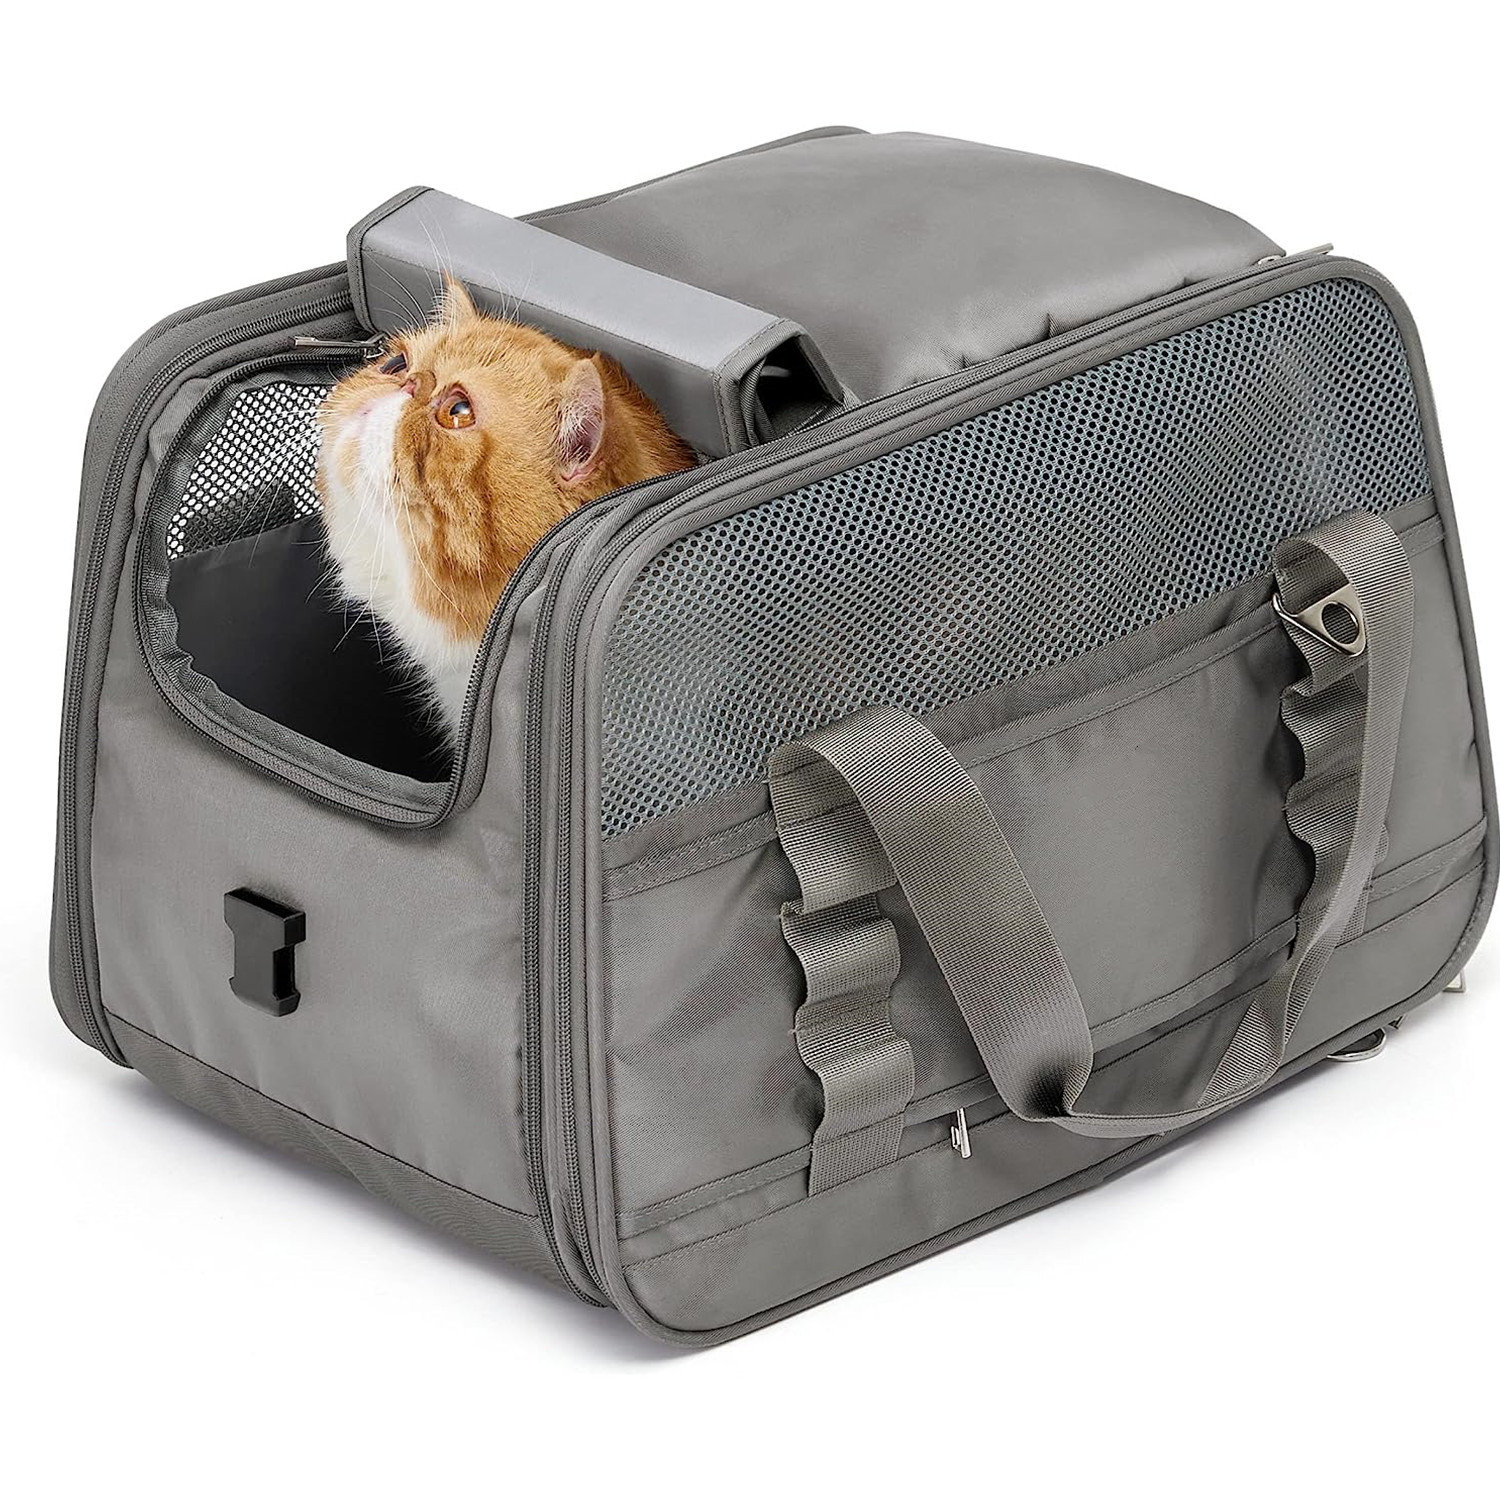 Tucker Murphy Pet Airline Approved Large Pet Travel Carrier,4 Sides Expandable with 2 Mesh Pockets,3 Entry,Washable Pads,Shoulder Strap,Soft Sided